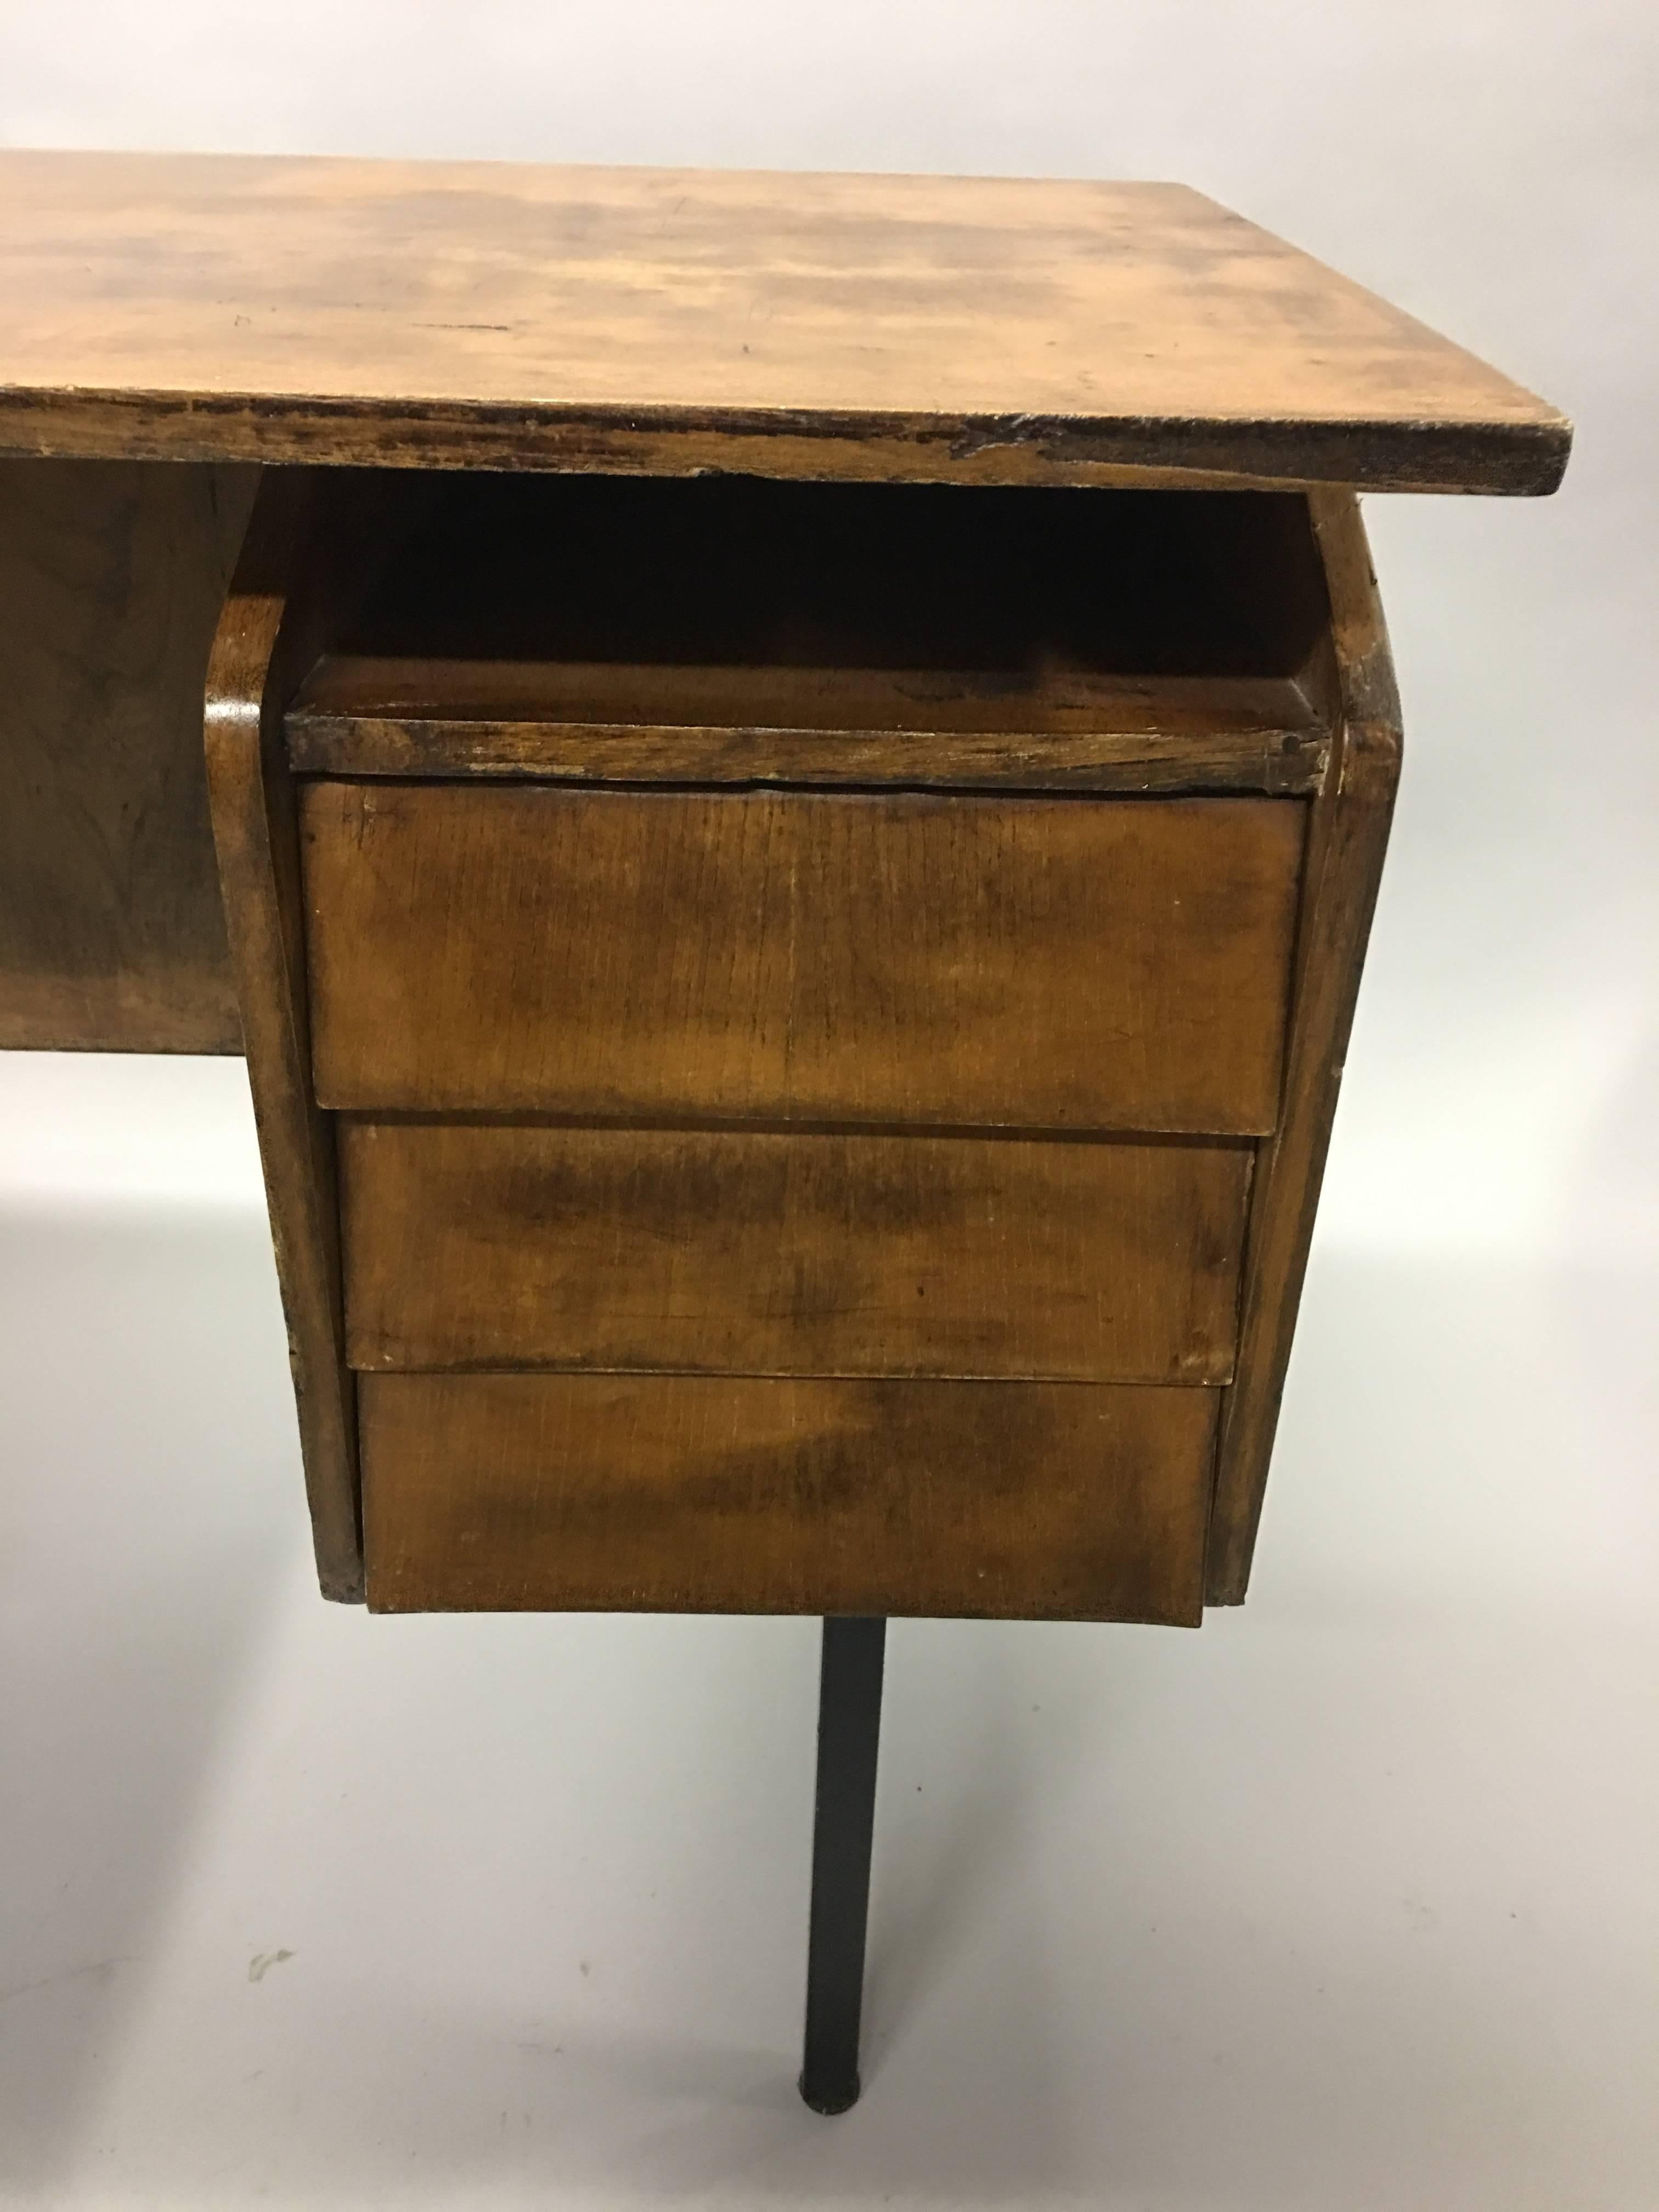 Hand-Crafted German Mid-Century Modern Cantilevered Wood and Metal Desk by Voss, 1950 For Sale